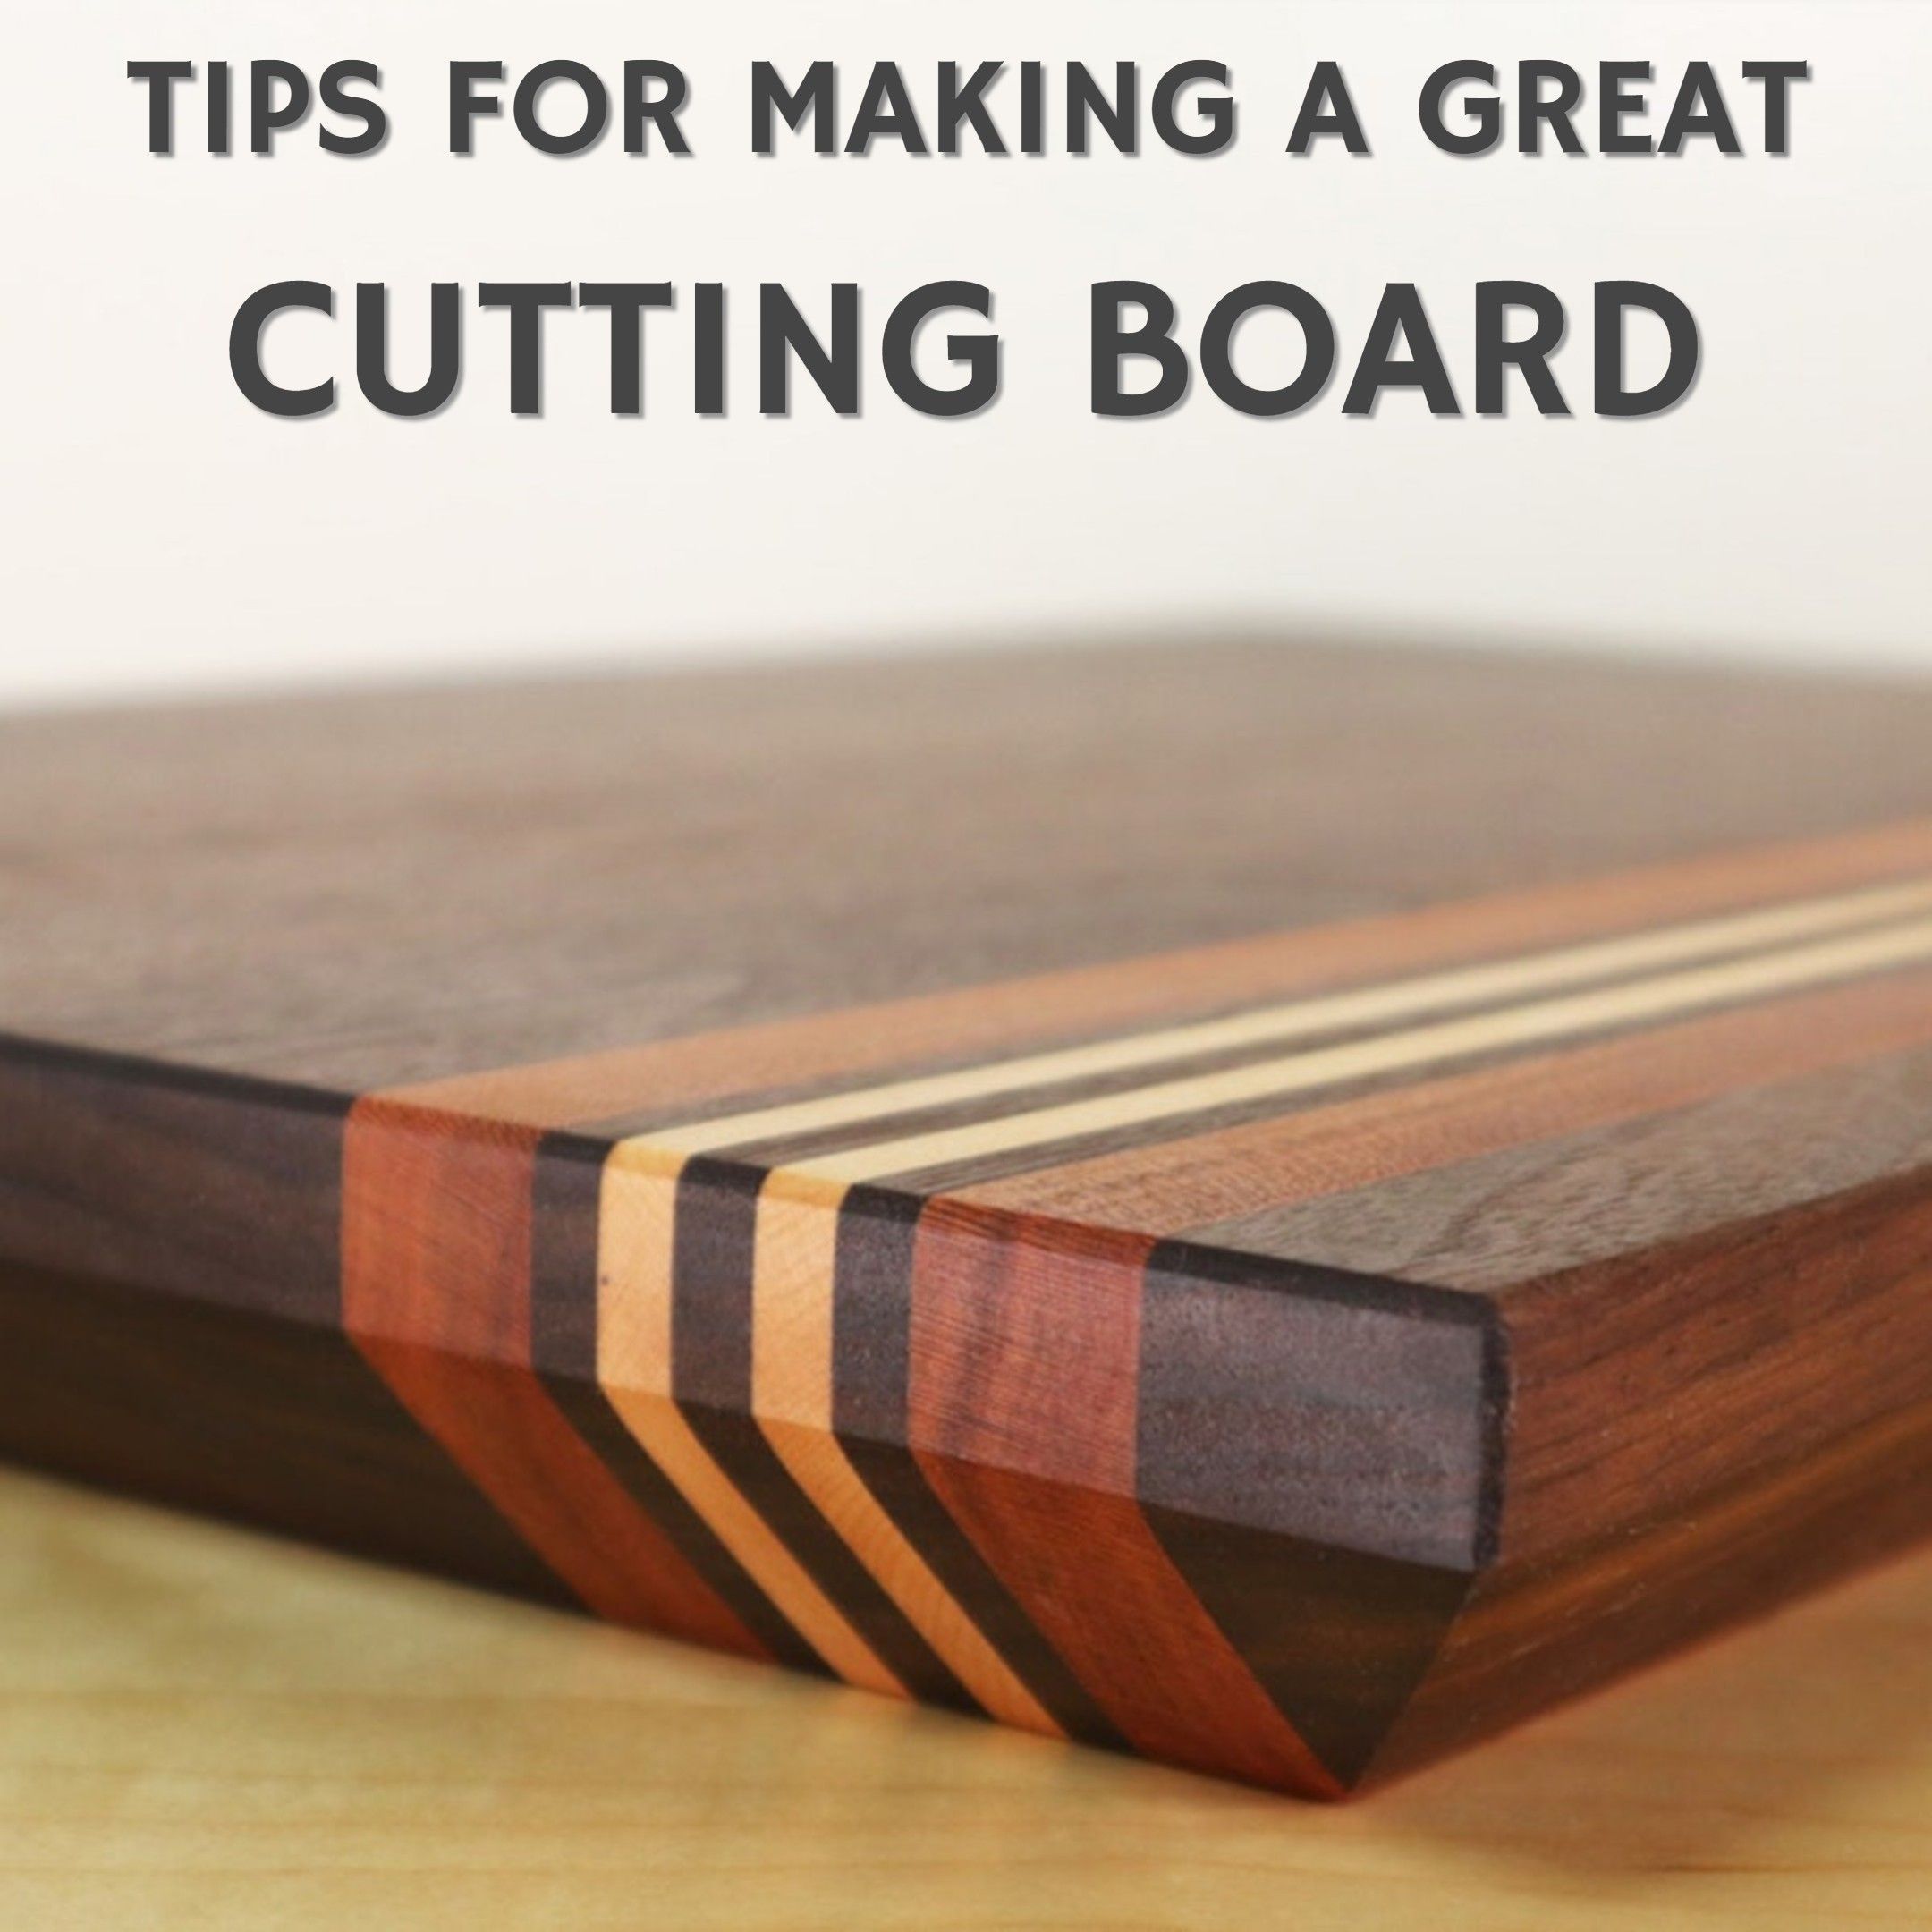 Tips for Making Great Cutting Boards - Tips for Making Great Cutting Boards -   19 diy Wood work ideas